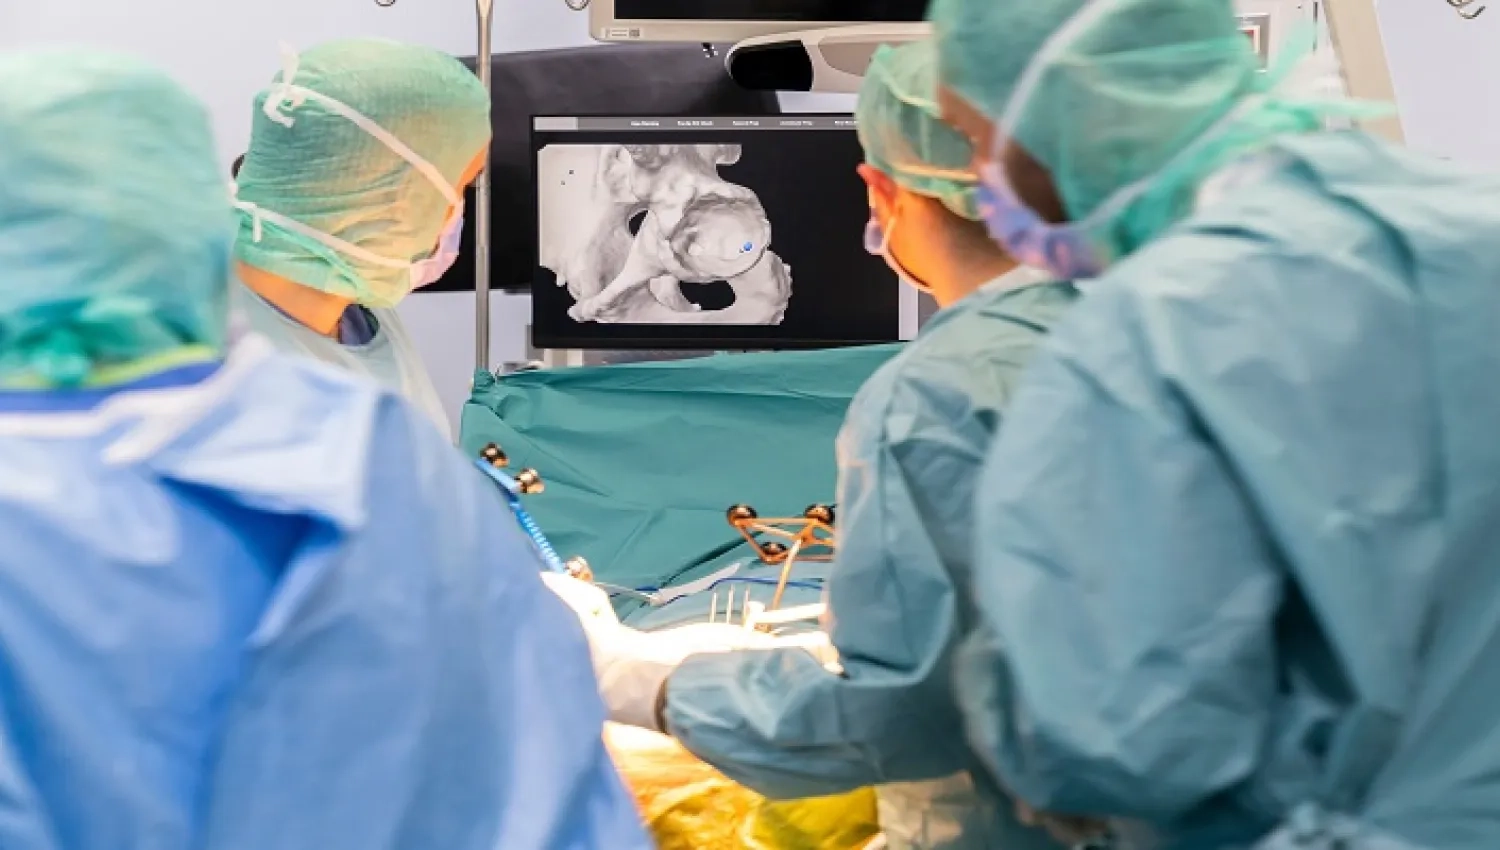 Knee and Hip Arthroplasty Boosts Quality of Life